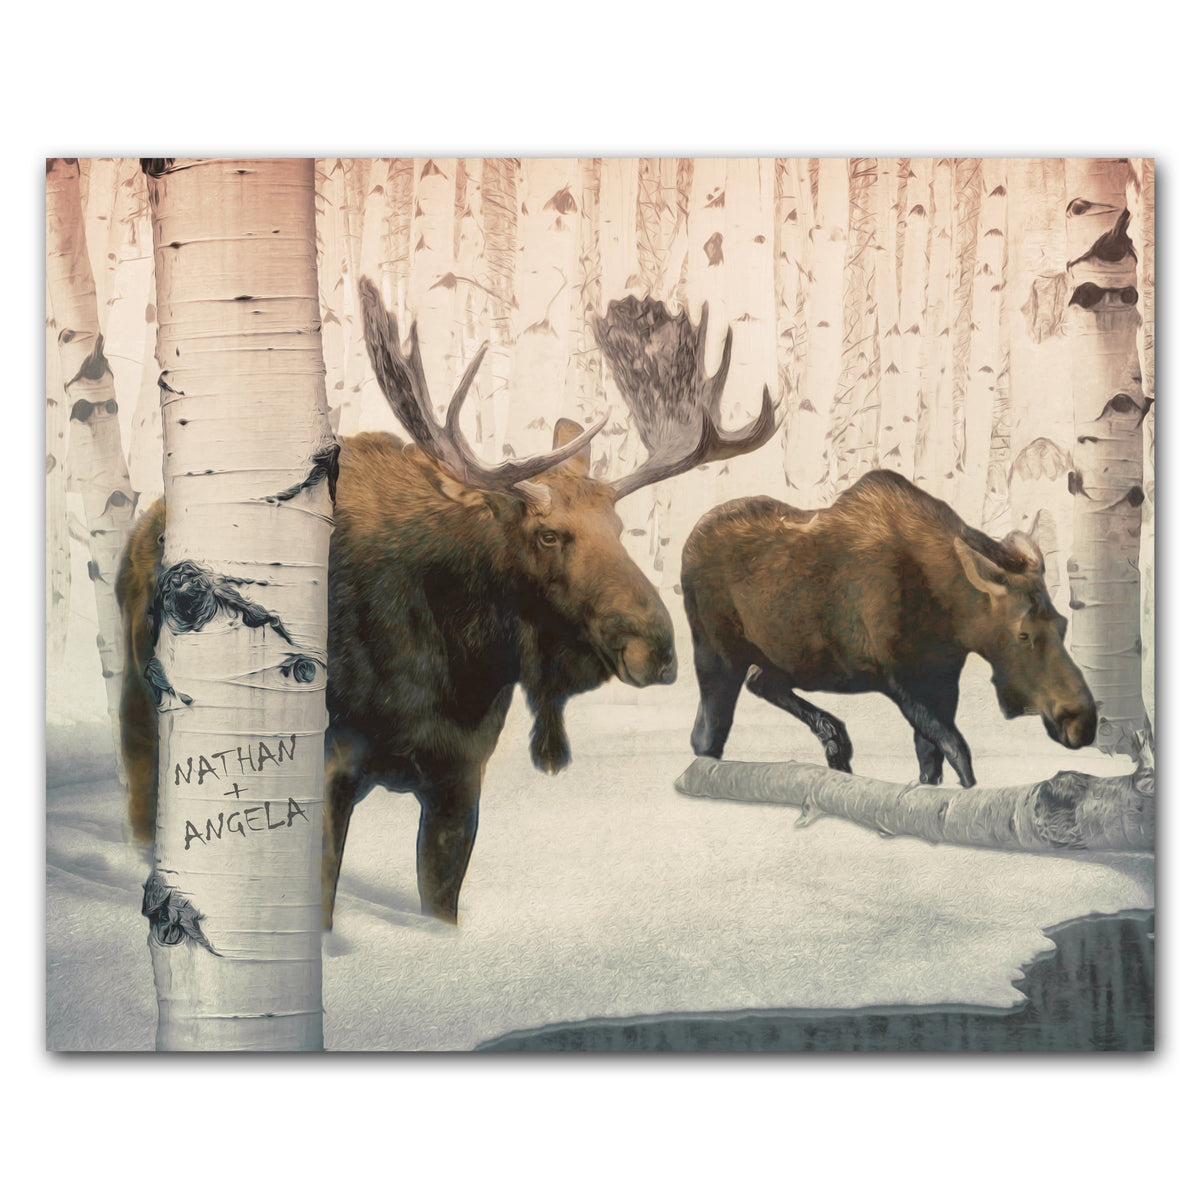 Collectable moose gift personalized for you - Wood block mount